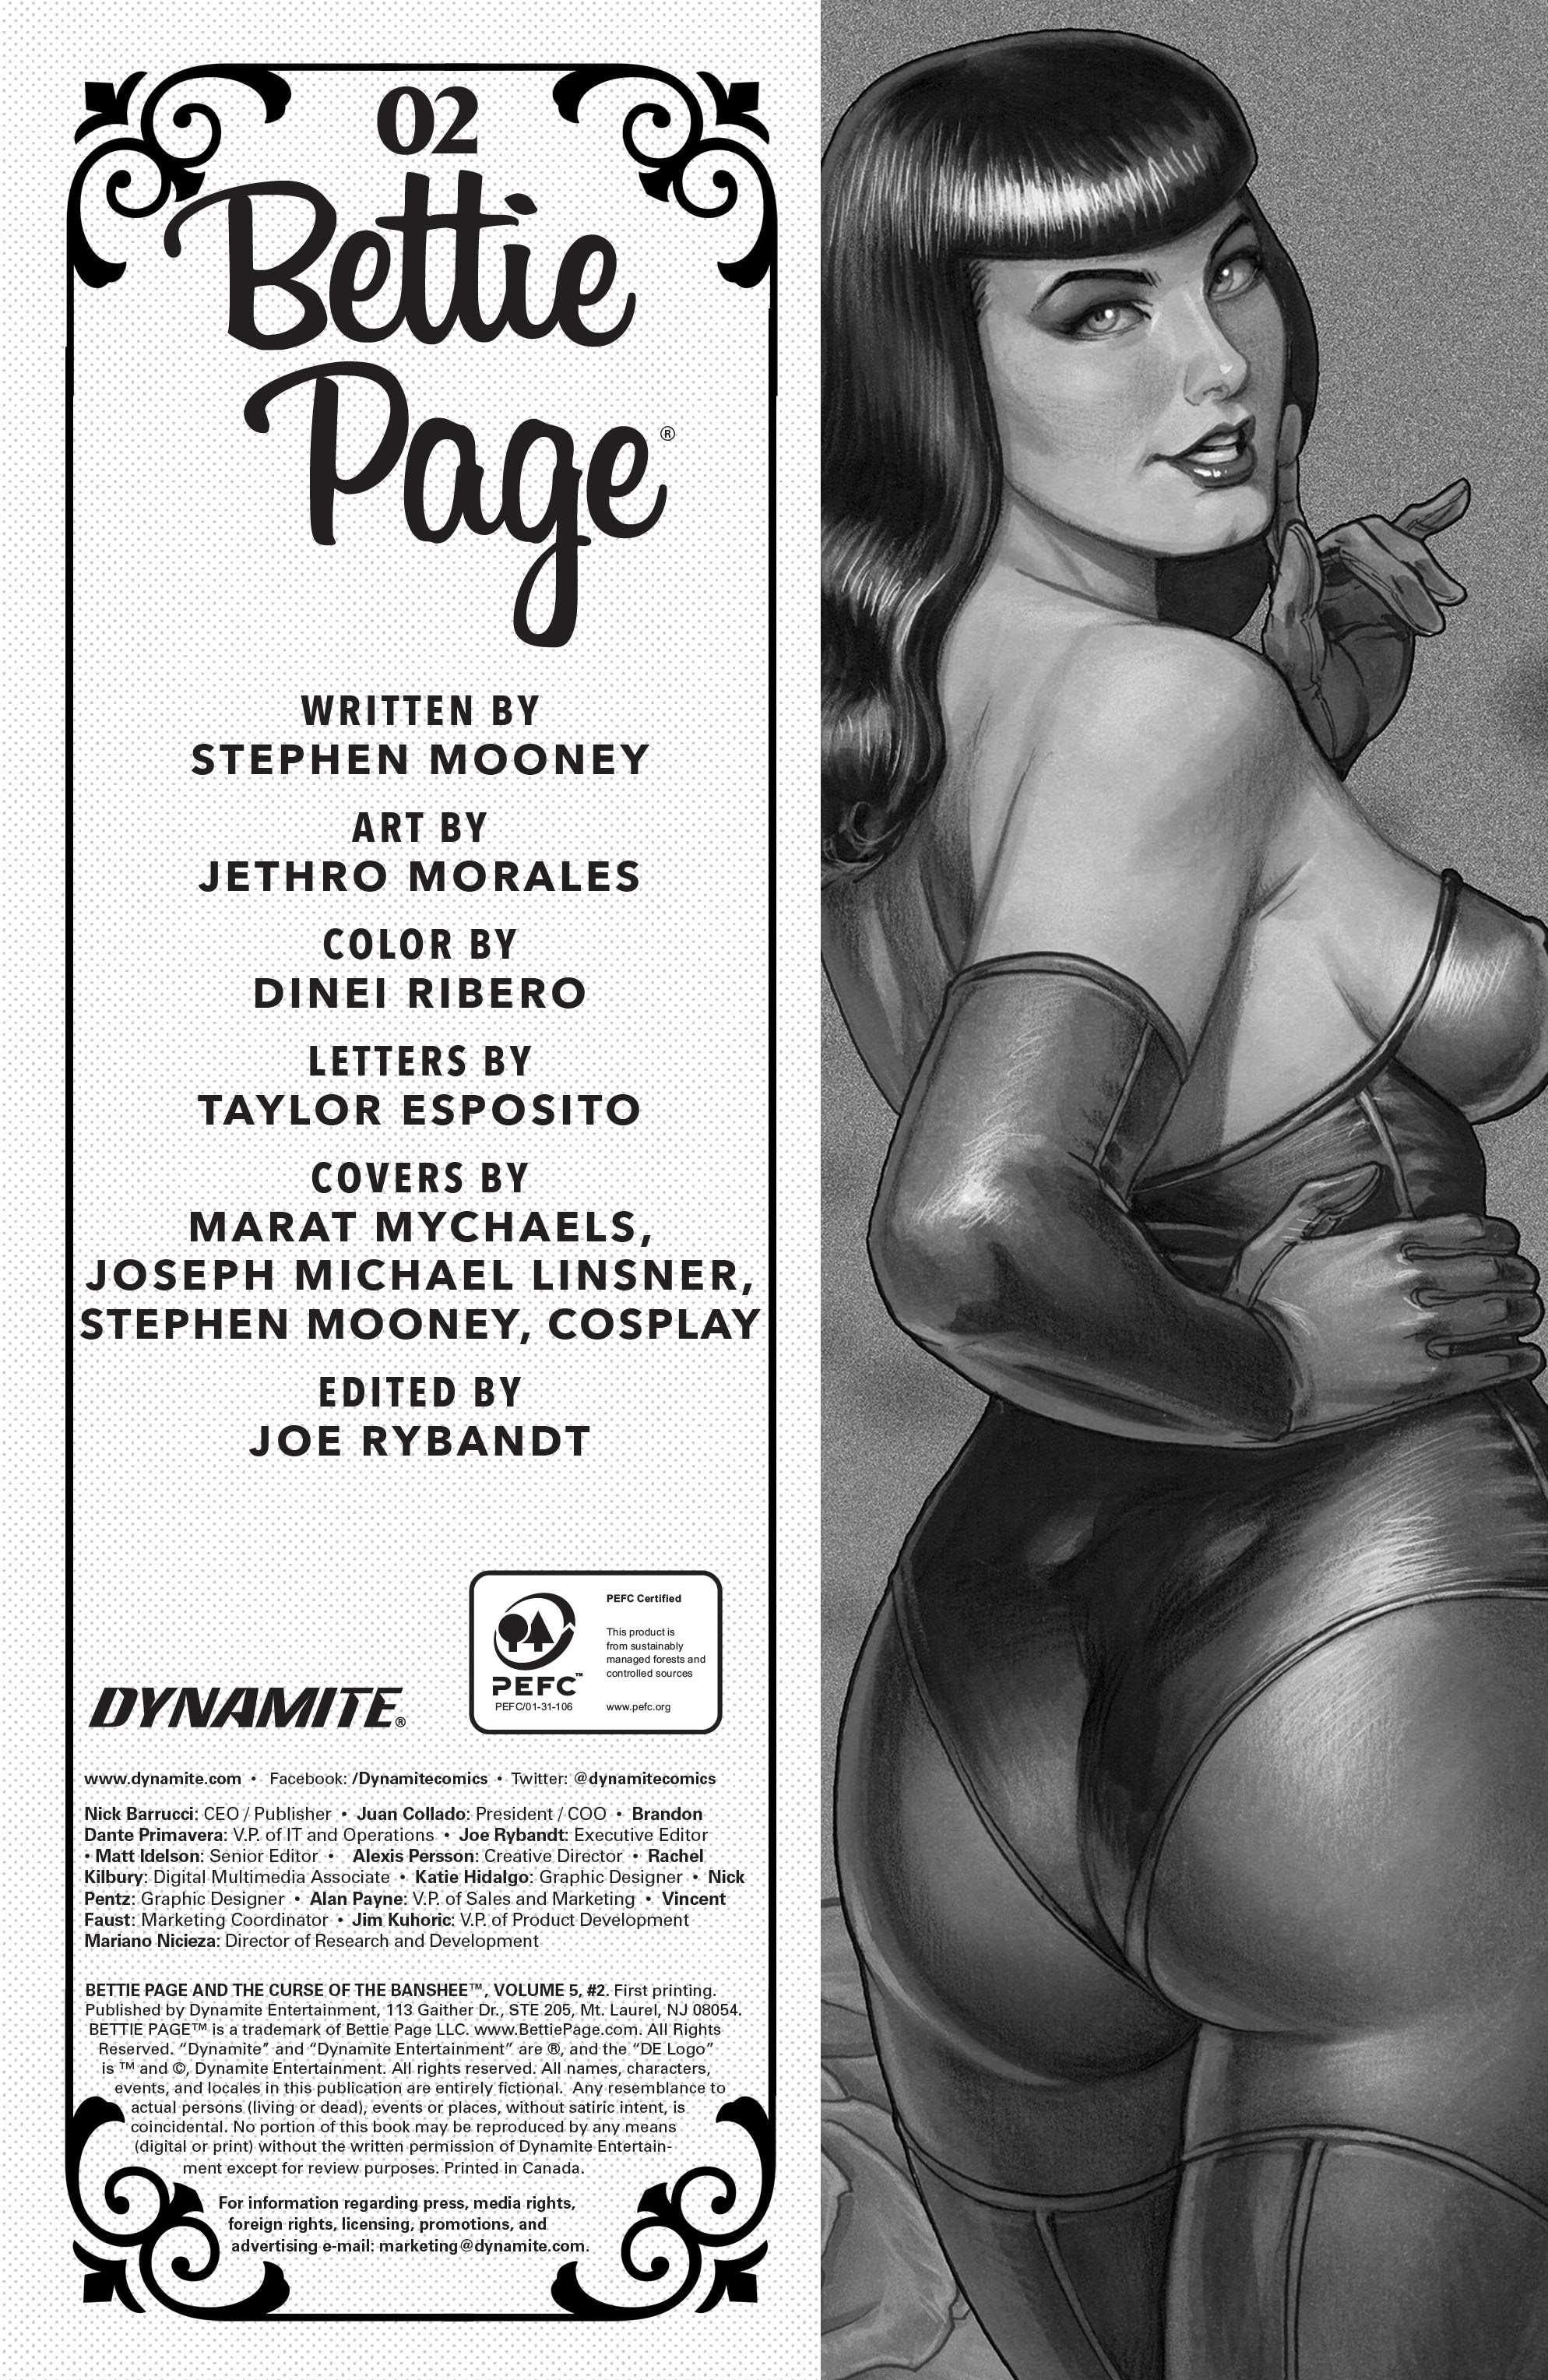 Read online Bettie Page & The Curse of the Banshee comic -  Issue #2 - 6